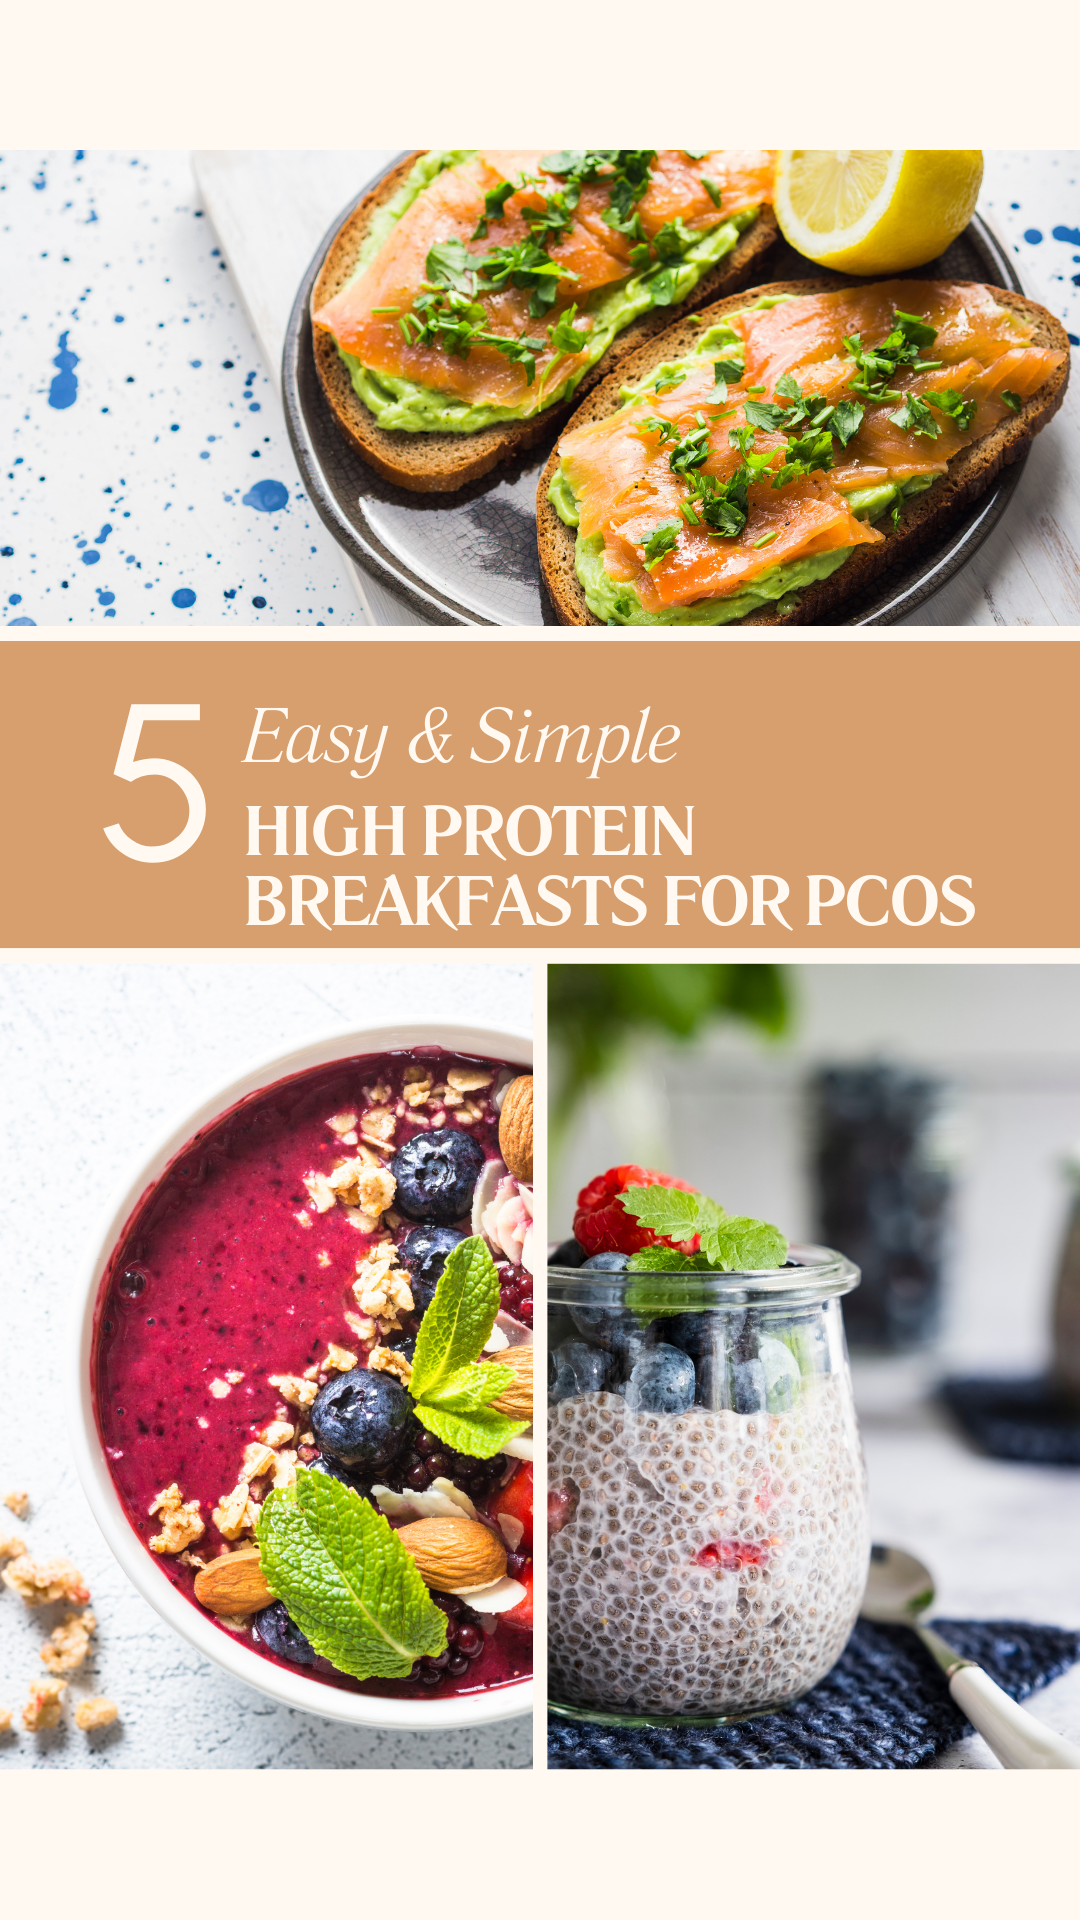 photo of 5 easy high protein breakfast ideas for pcos